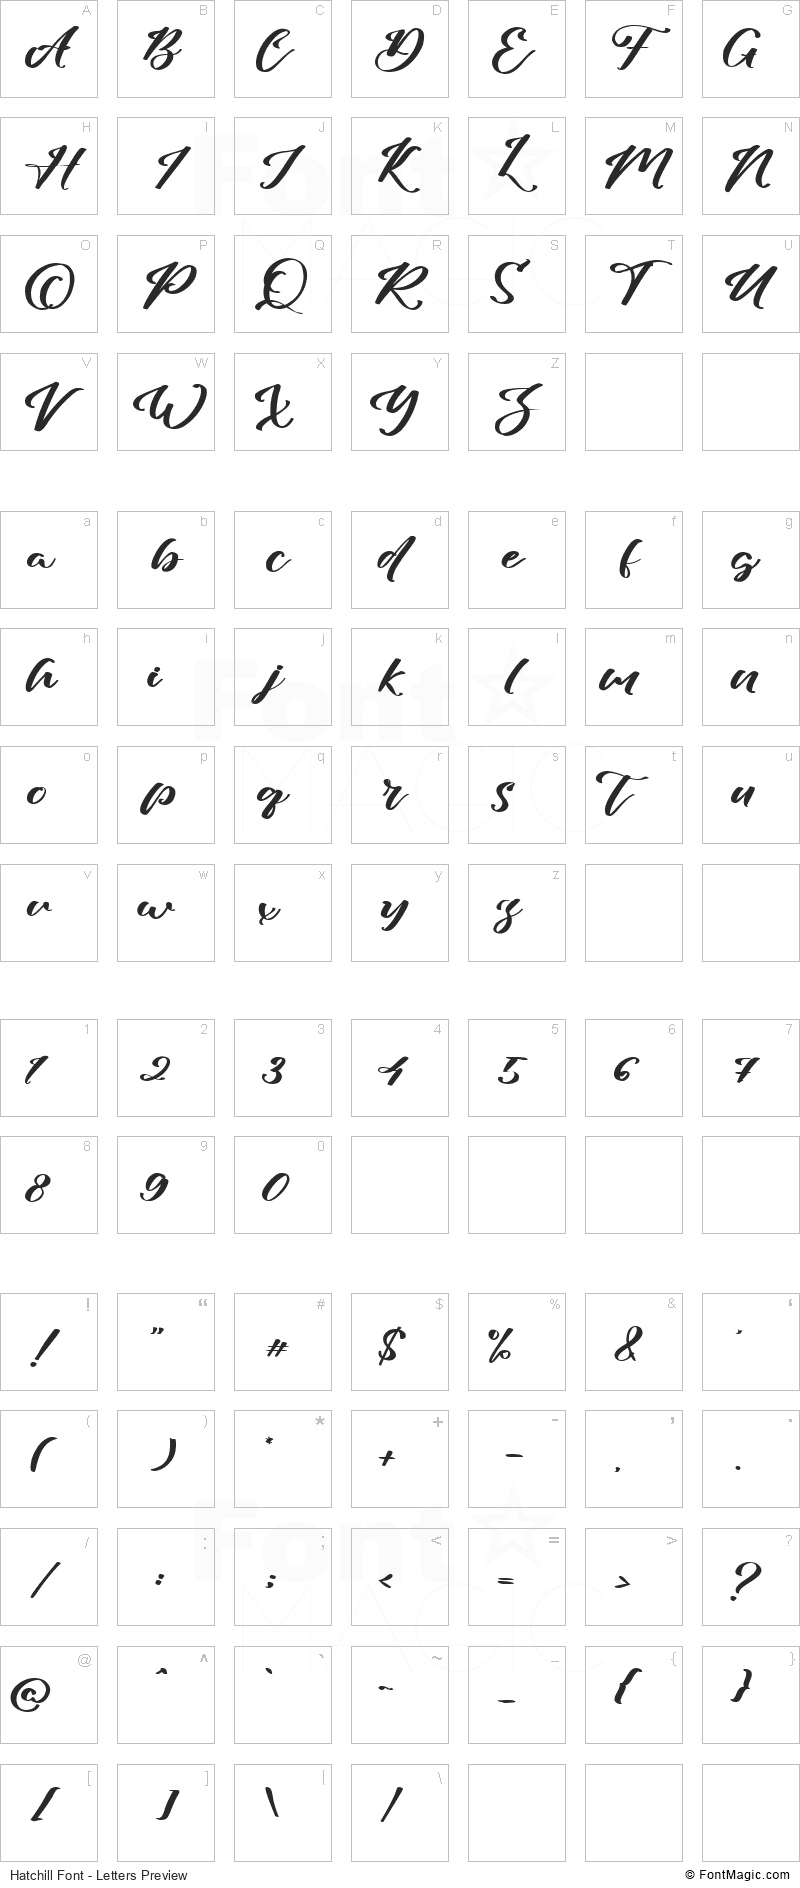 Hatchill Font - All Latters Preview Chart